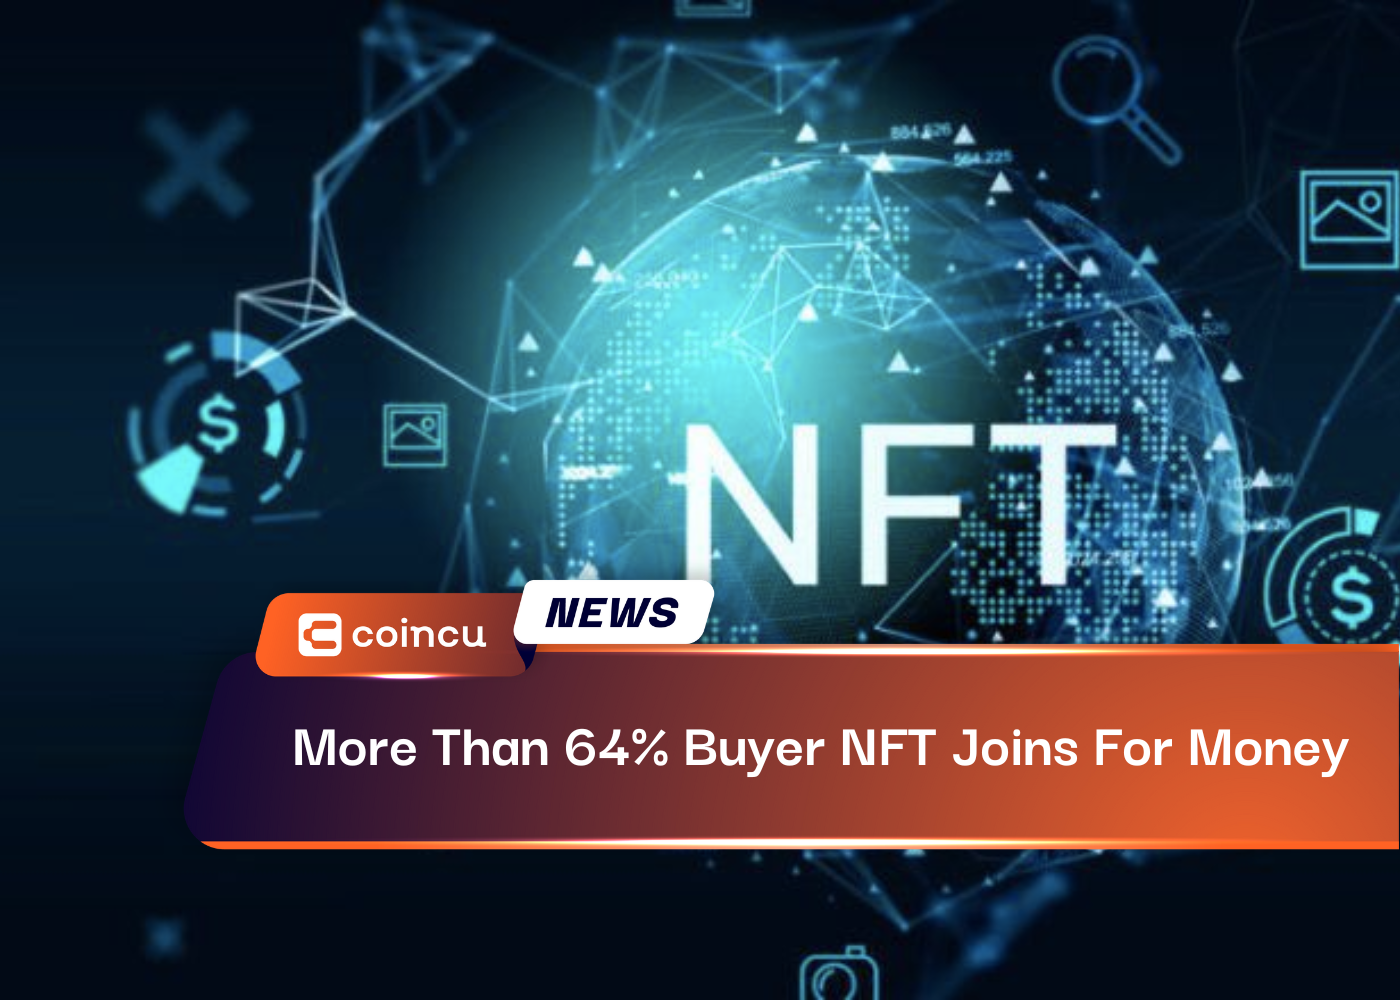 More Than 64% Buyer NFT Joins For Money